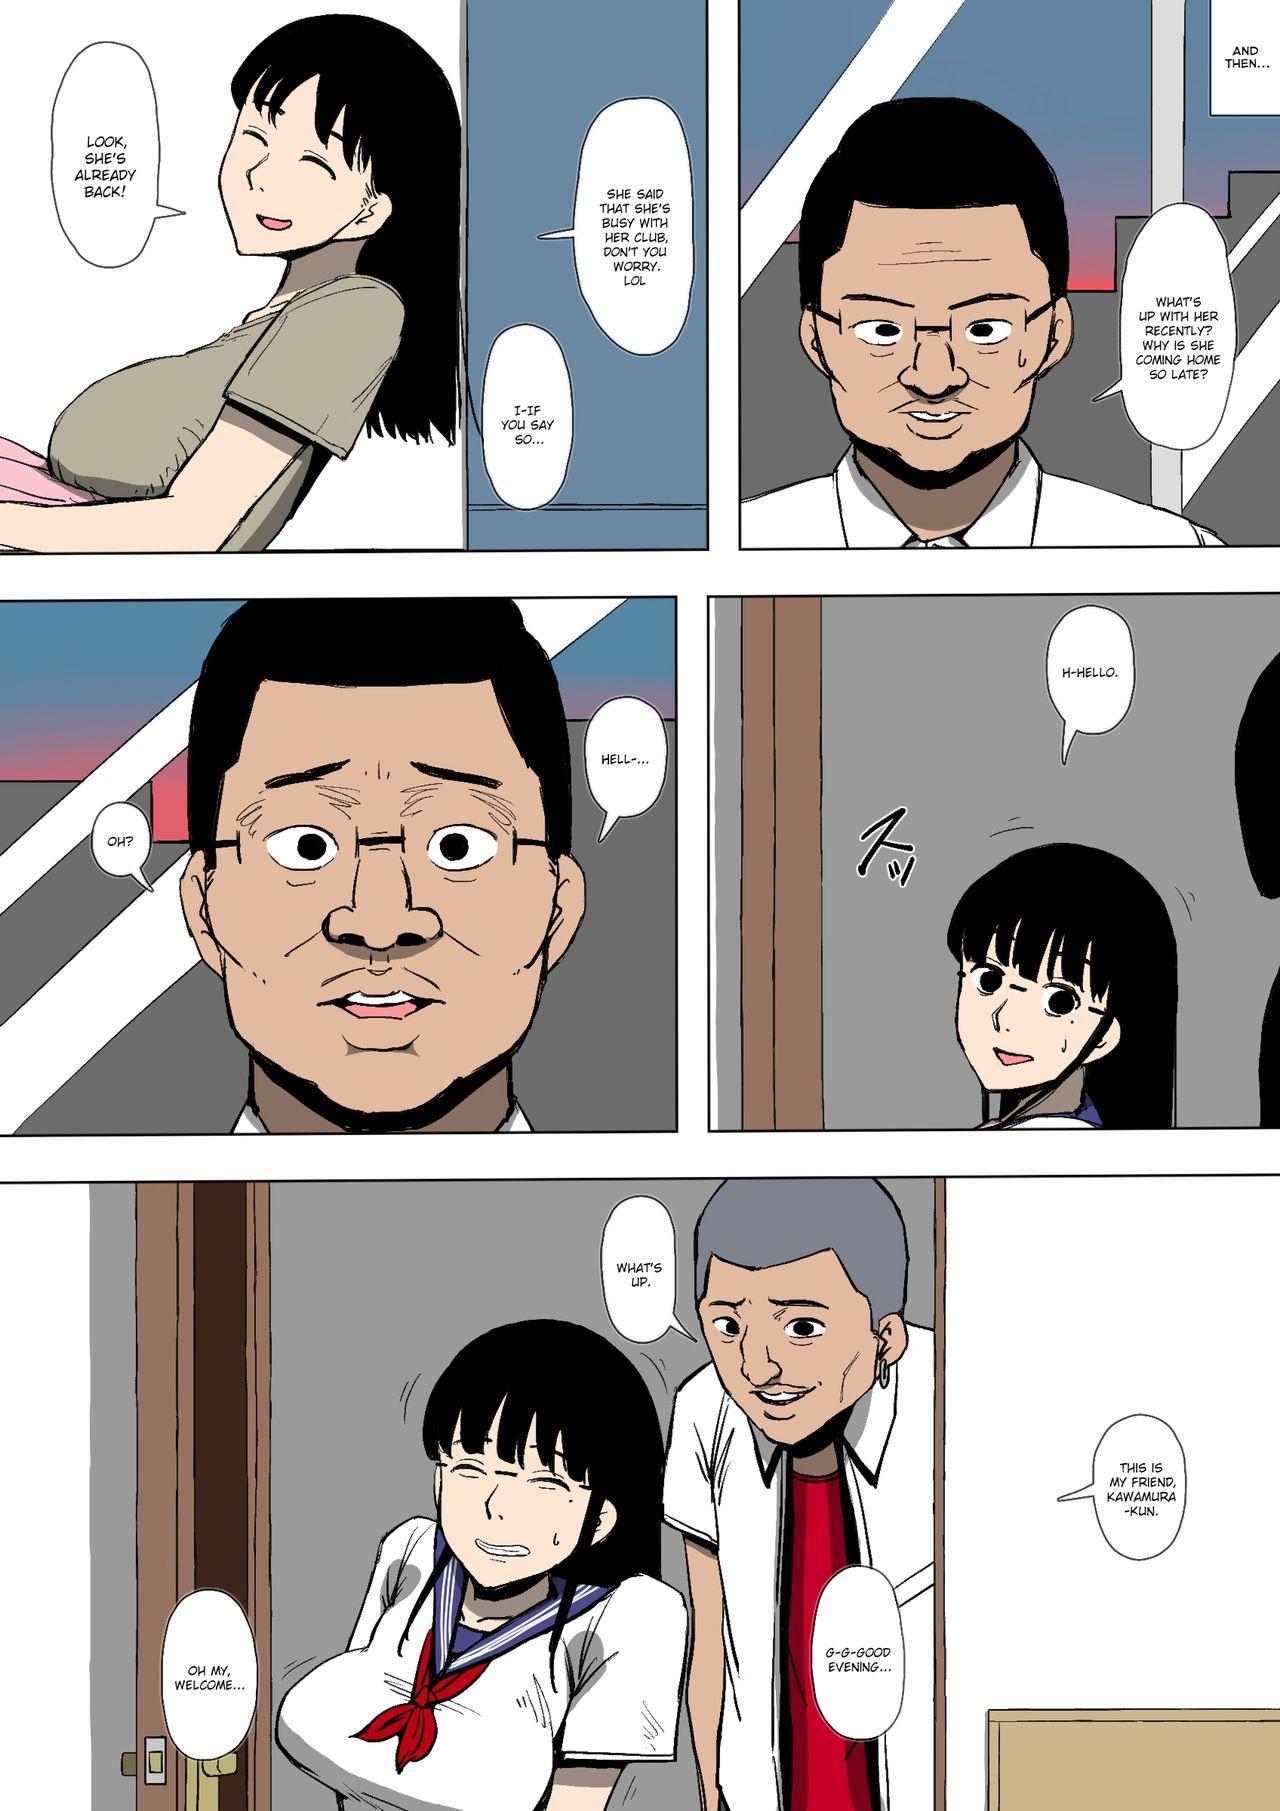 Musume ga Furyou ni Otosareteita | My Daughter was Corrupted by a Delinquent 4